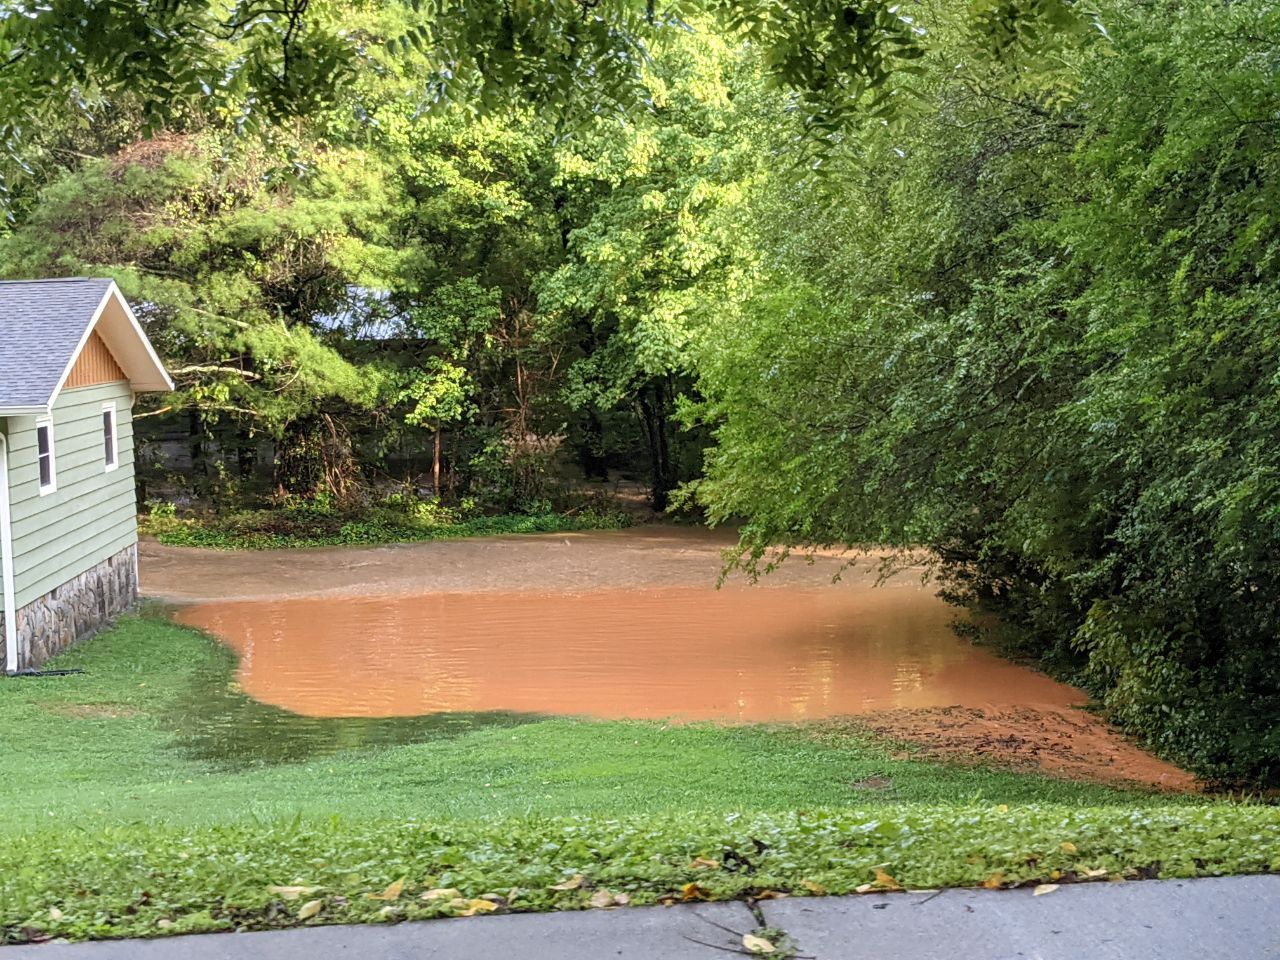 Pale green house on left side of frame, backyard full of brown flood waters